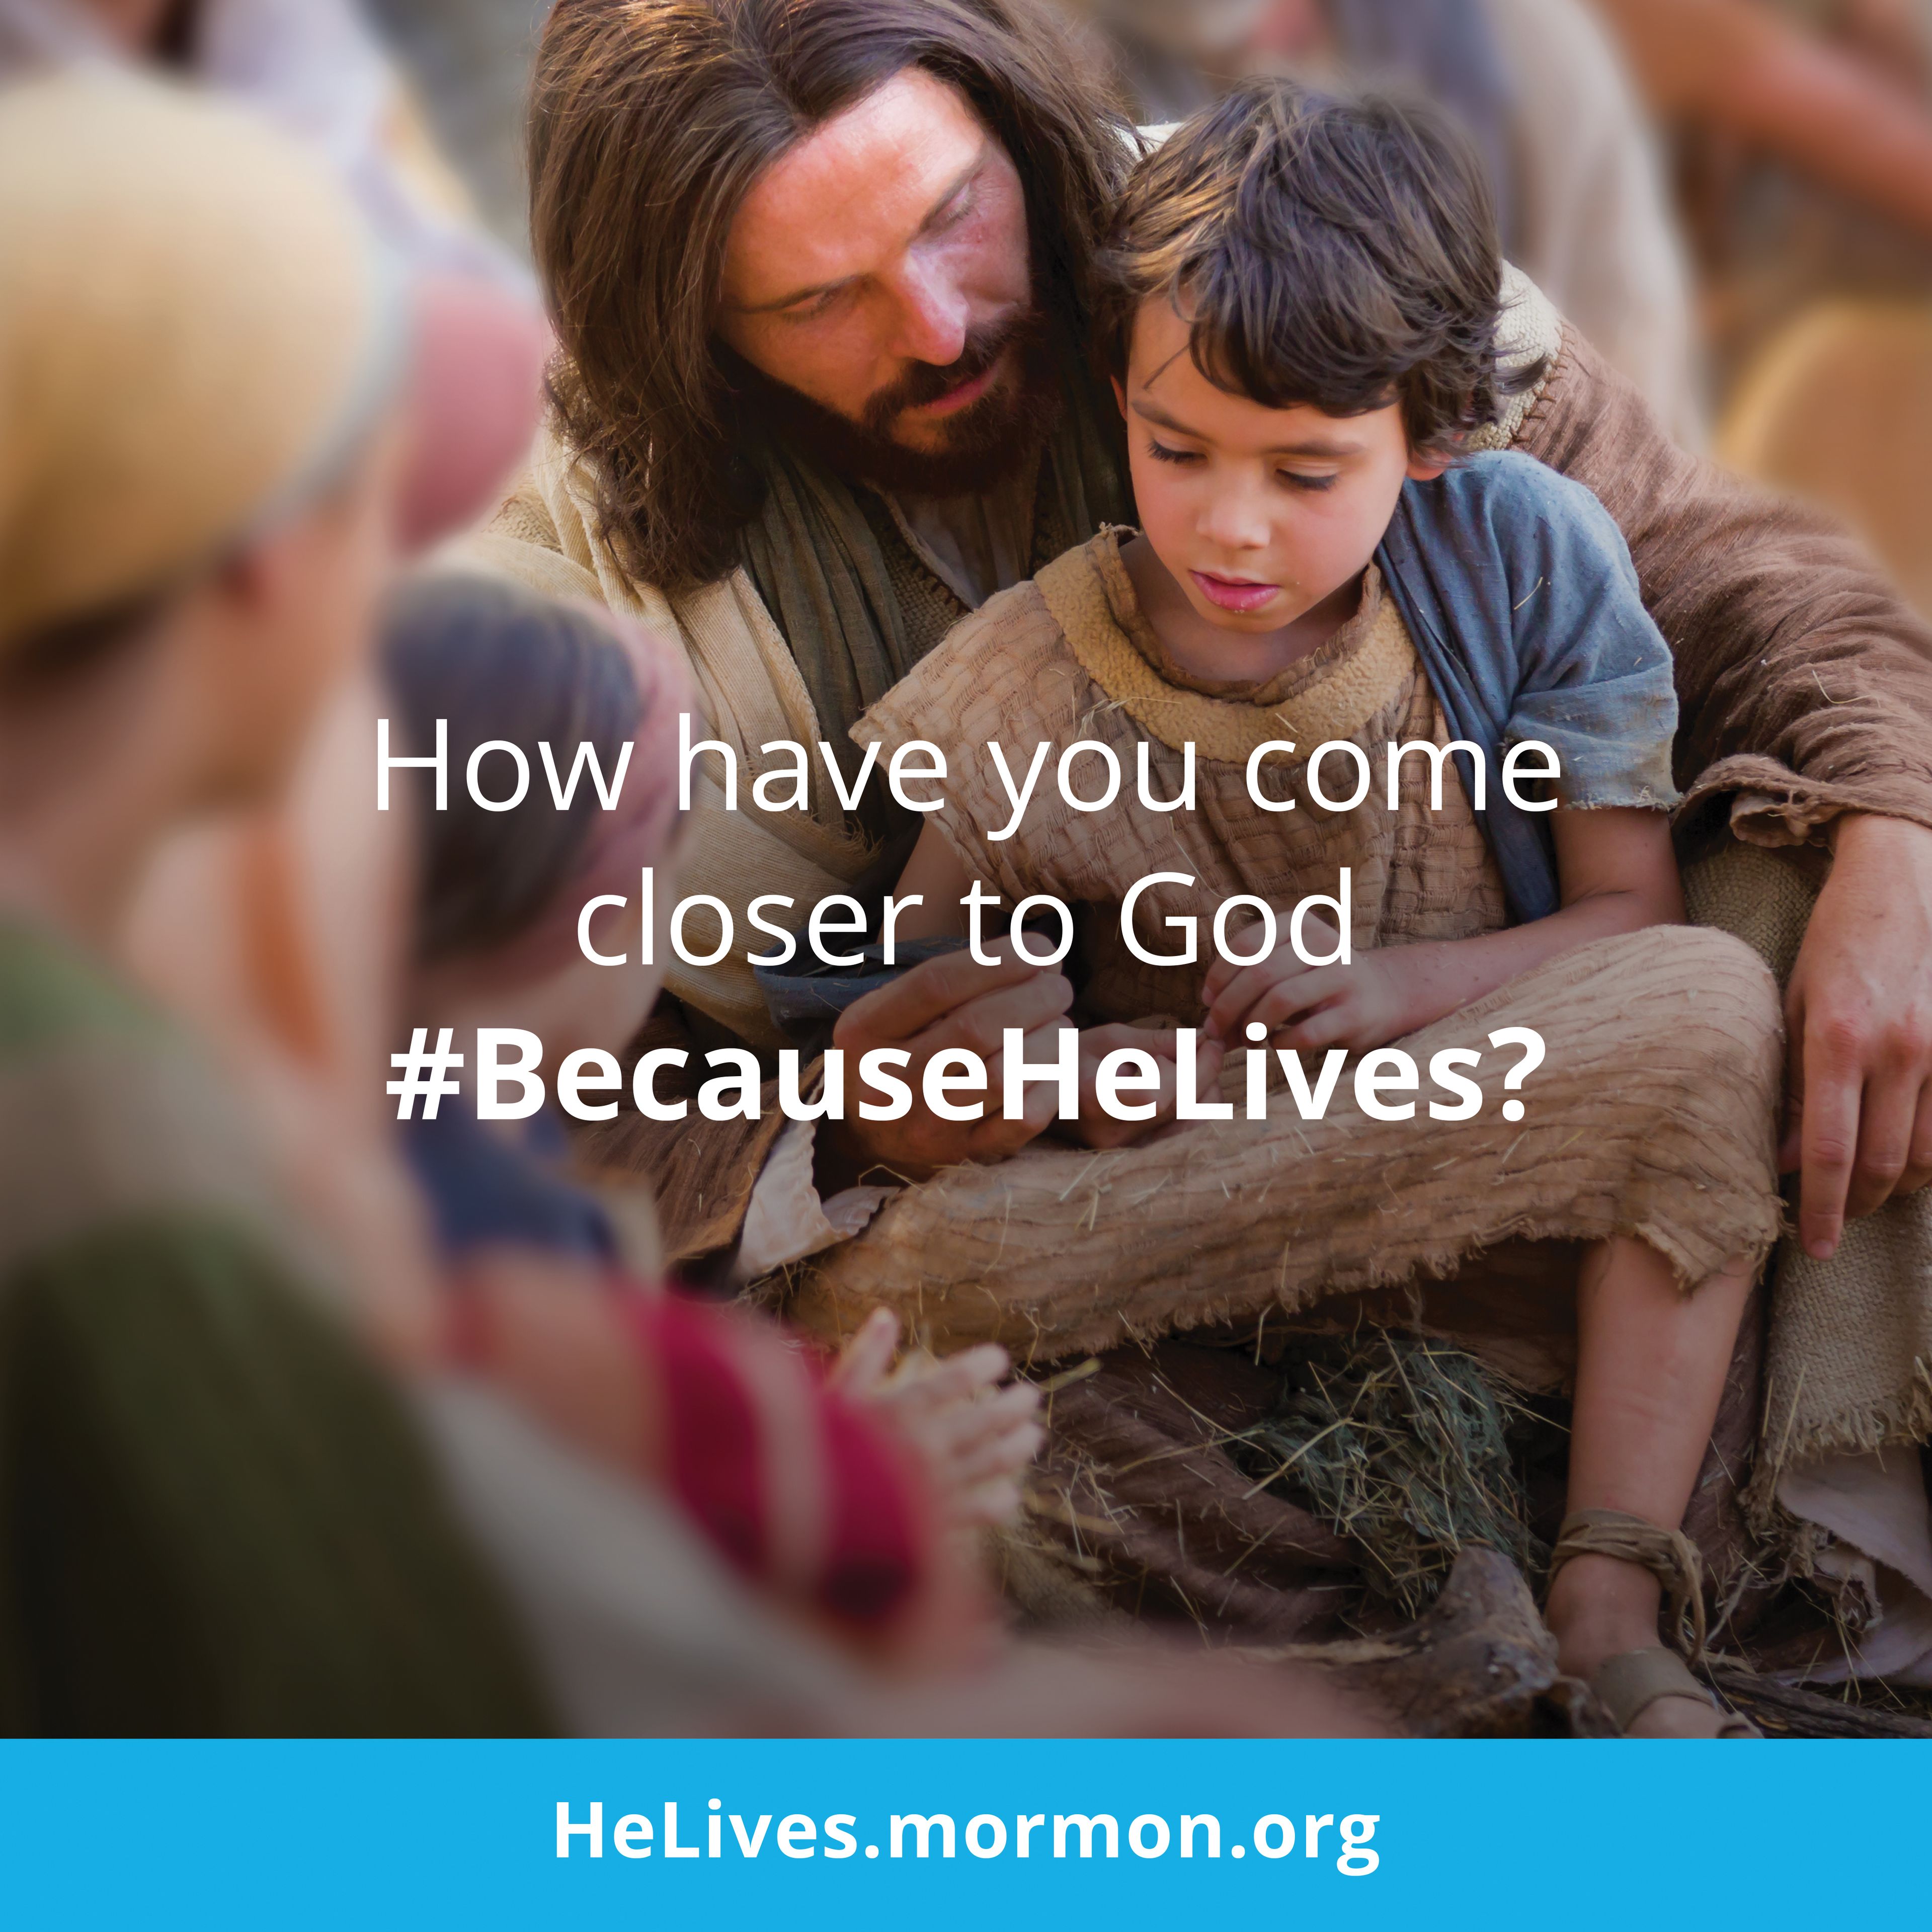 How have you come closer to God #BecauseHeLives? HeLives.mormon.org